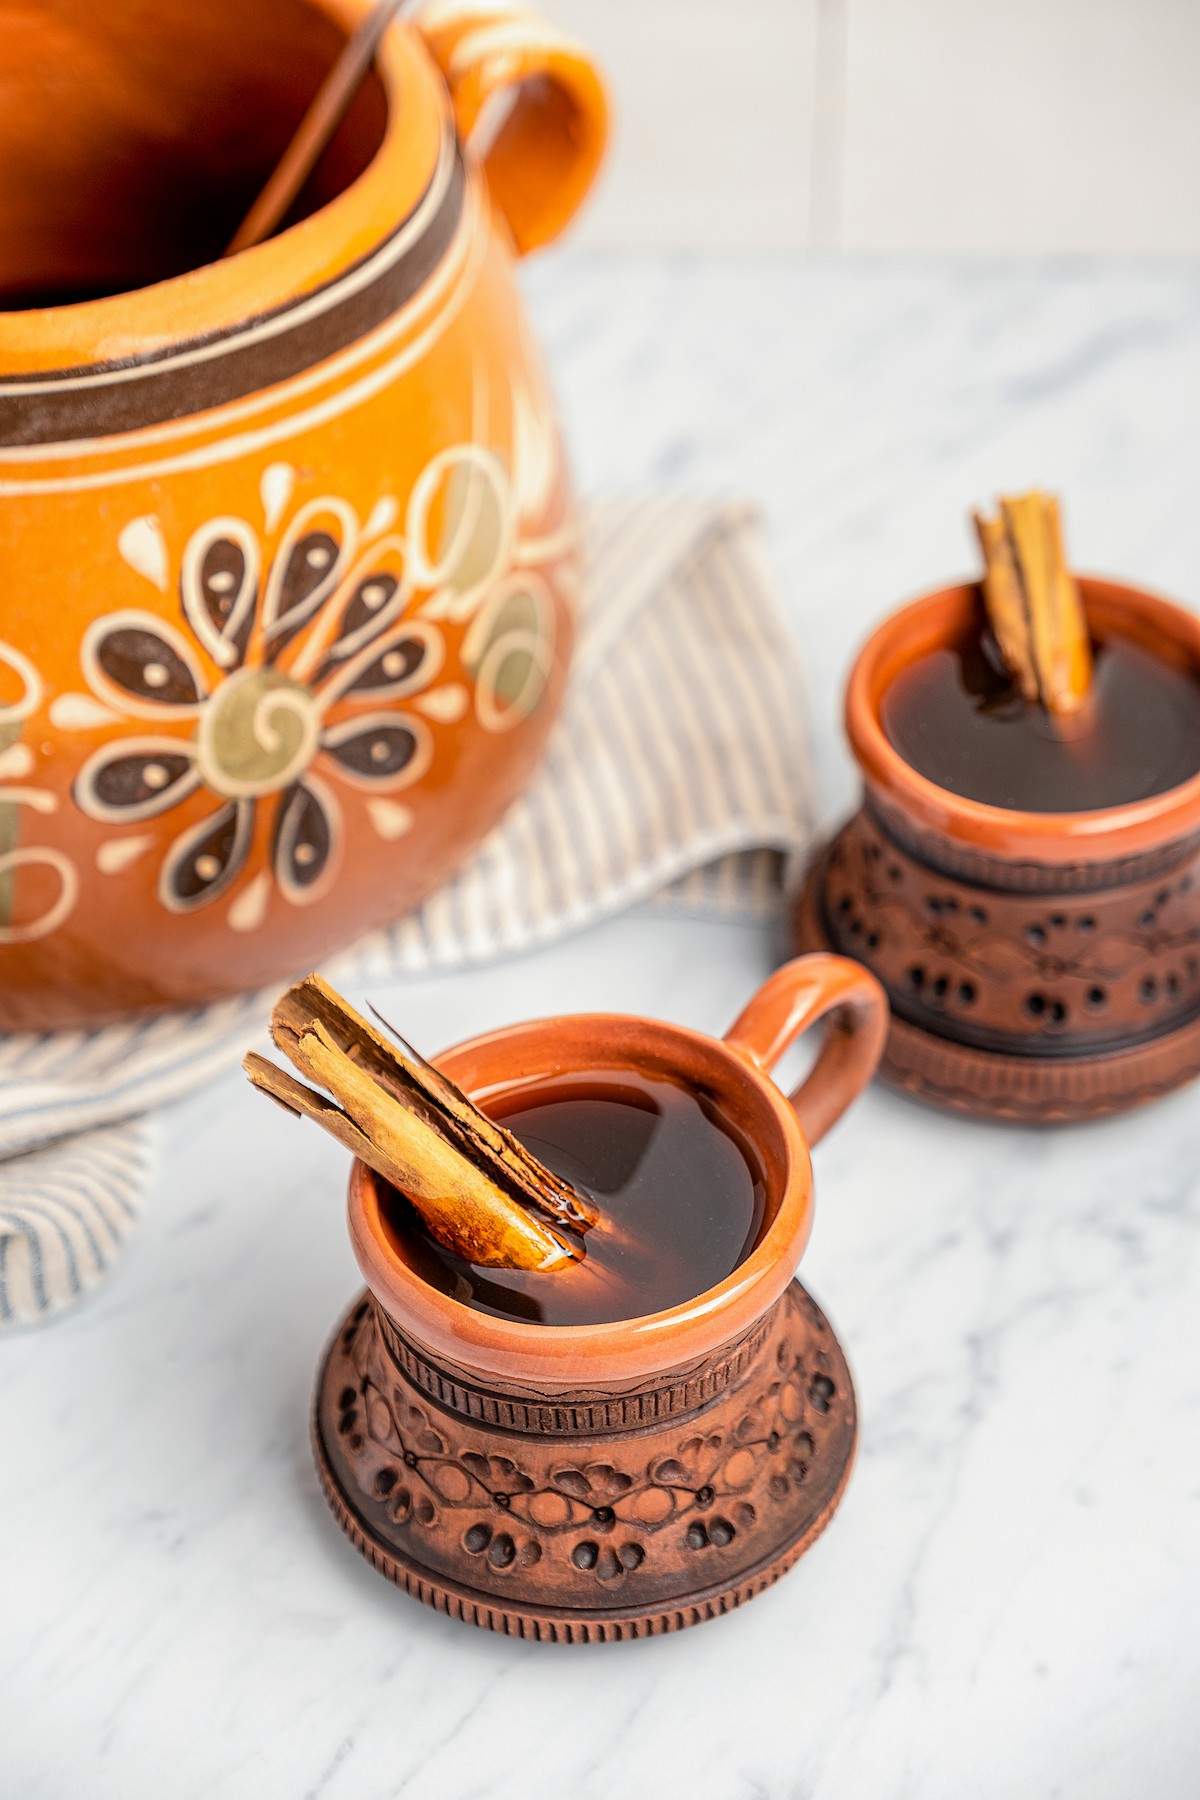 Two cups and a pot filled with Café de Olla (Cinnamon Mexican Coffee). 